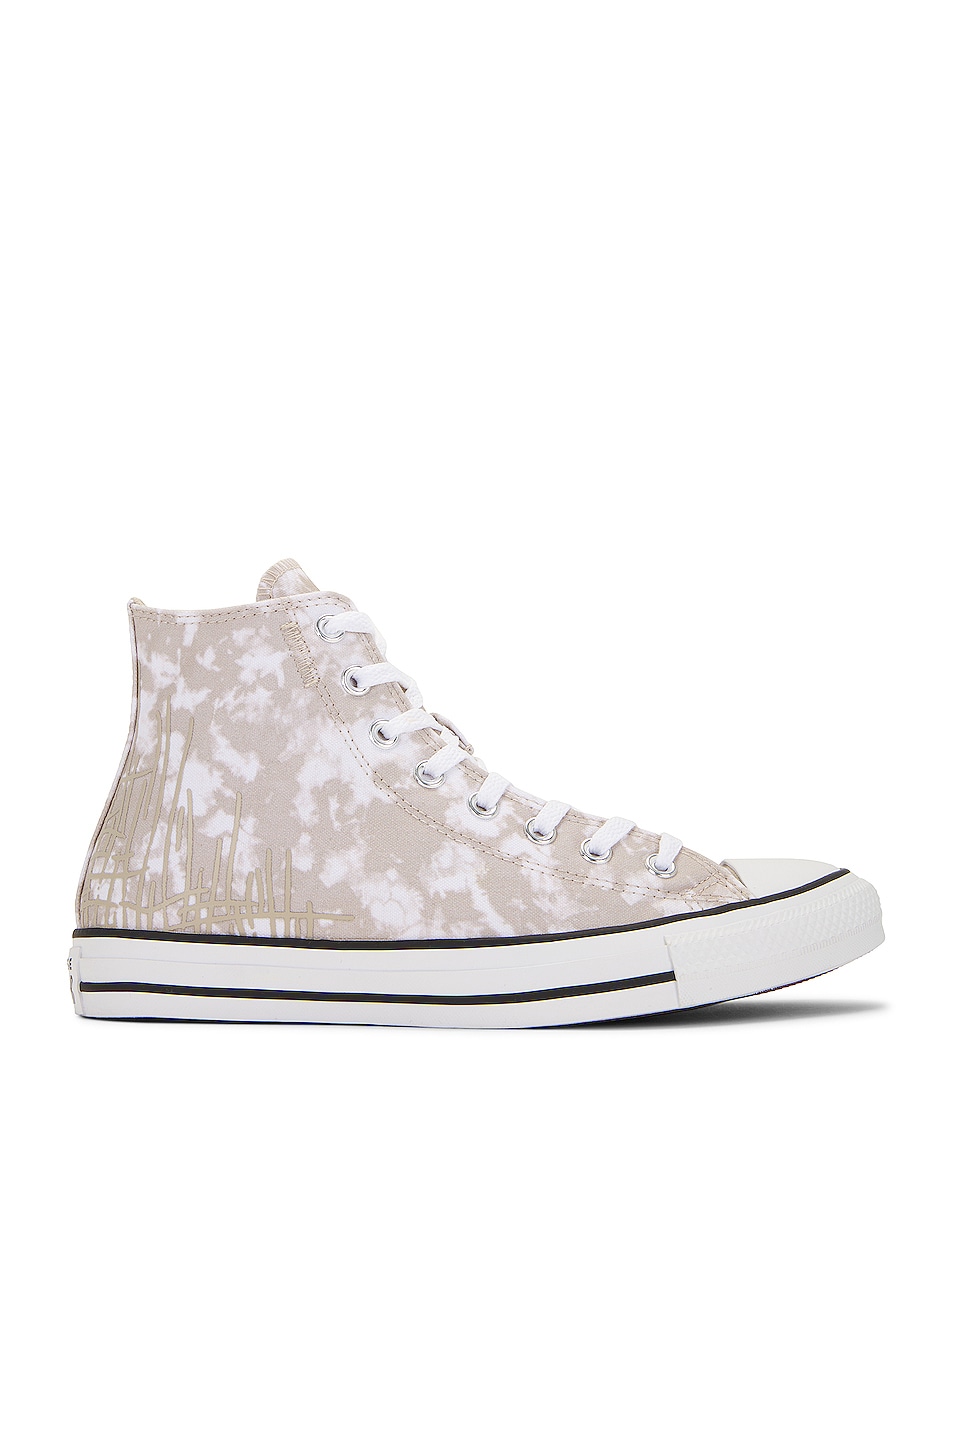 Image 1 of Converse Chuck Taylor All Star Dip Dye Shoe in Beach Stone